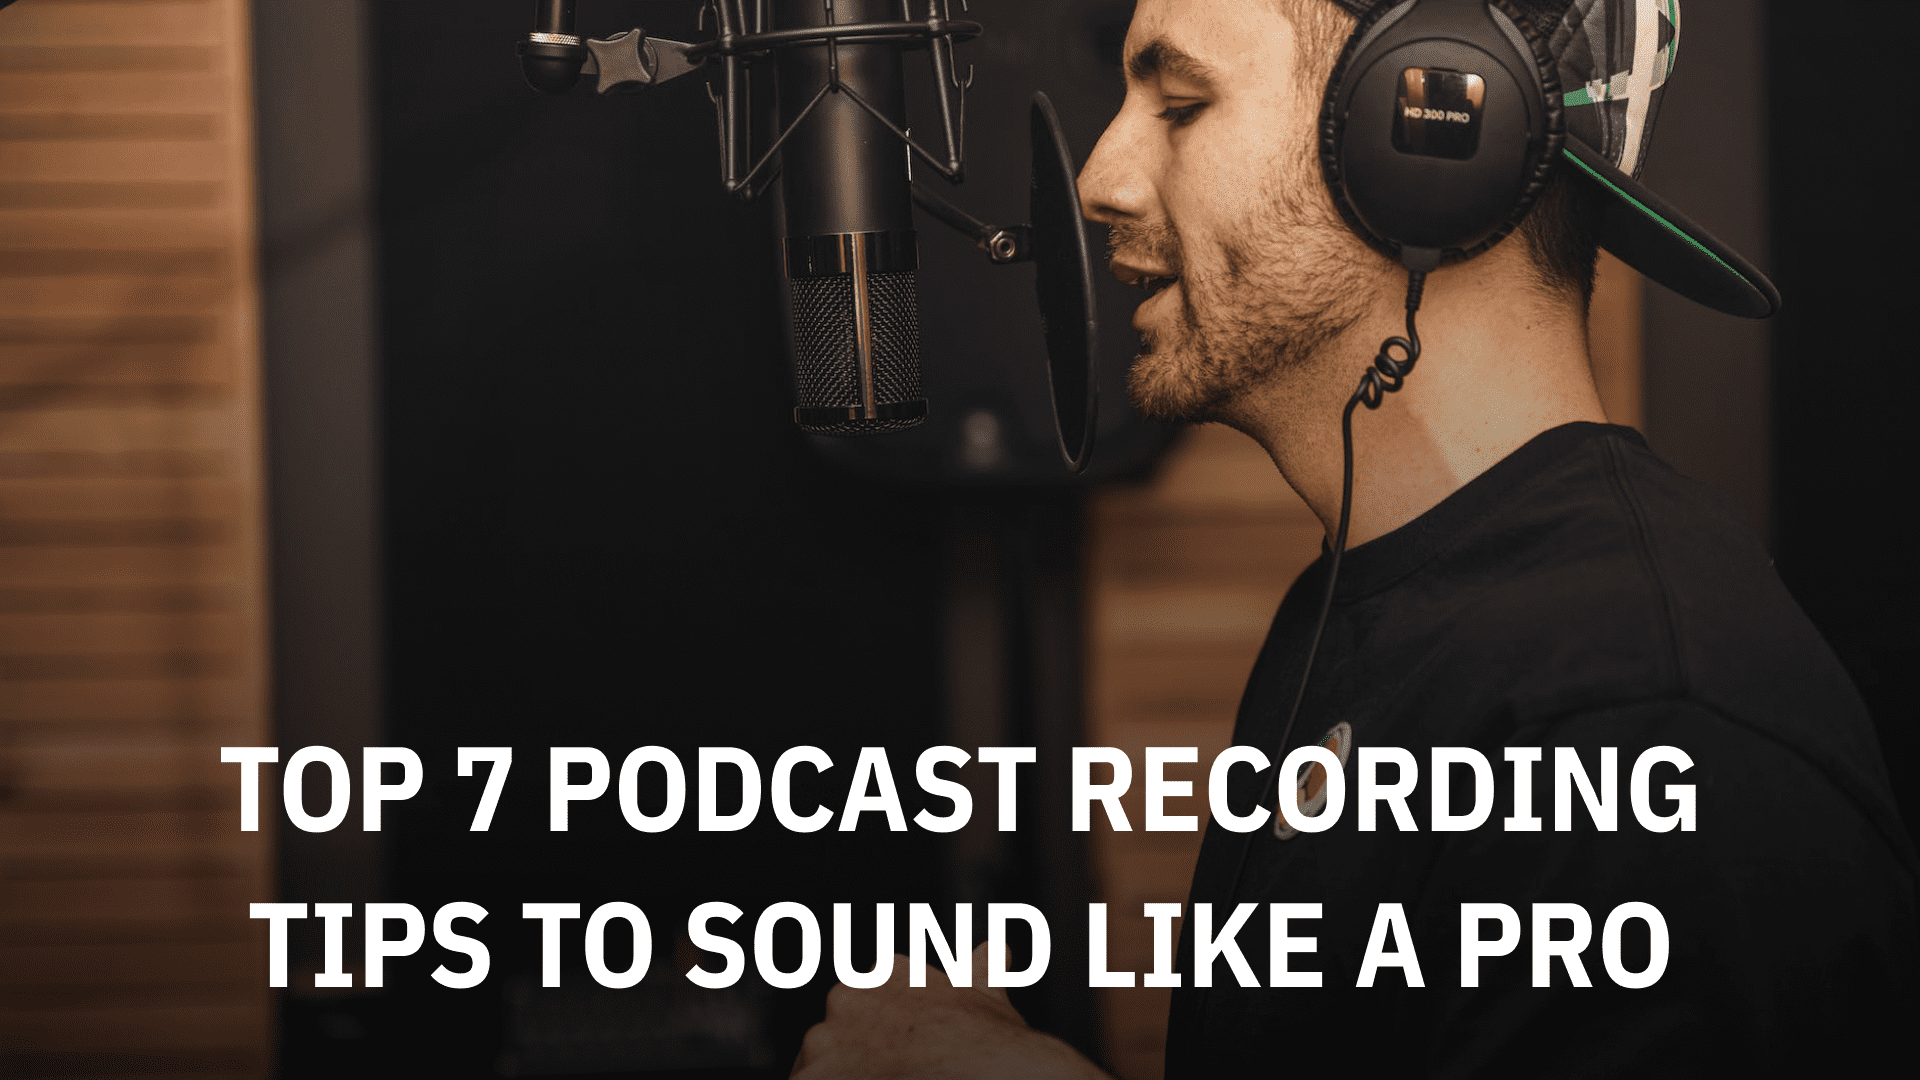 Top 7 Podcast Recording Tips to Sound Like a Pro